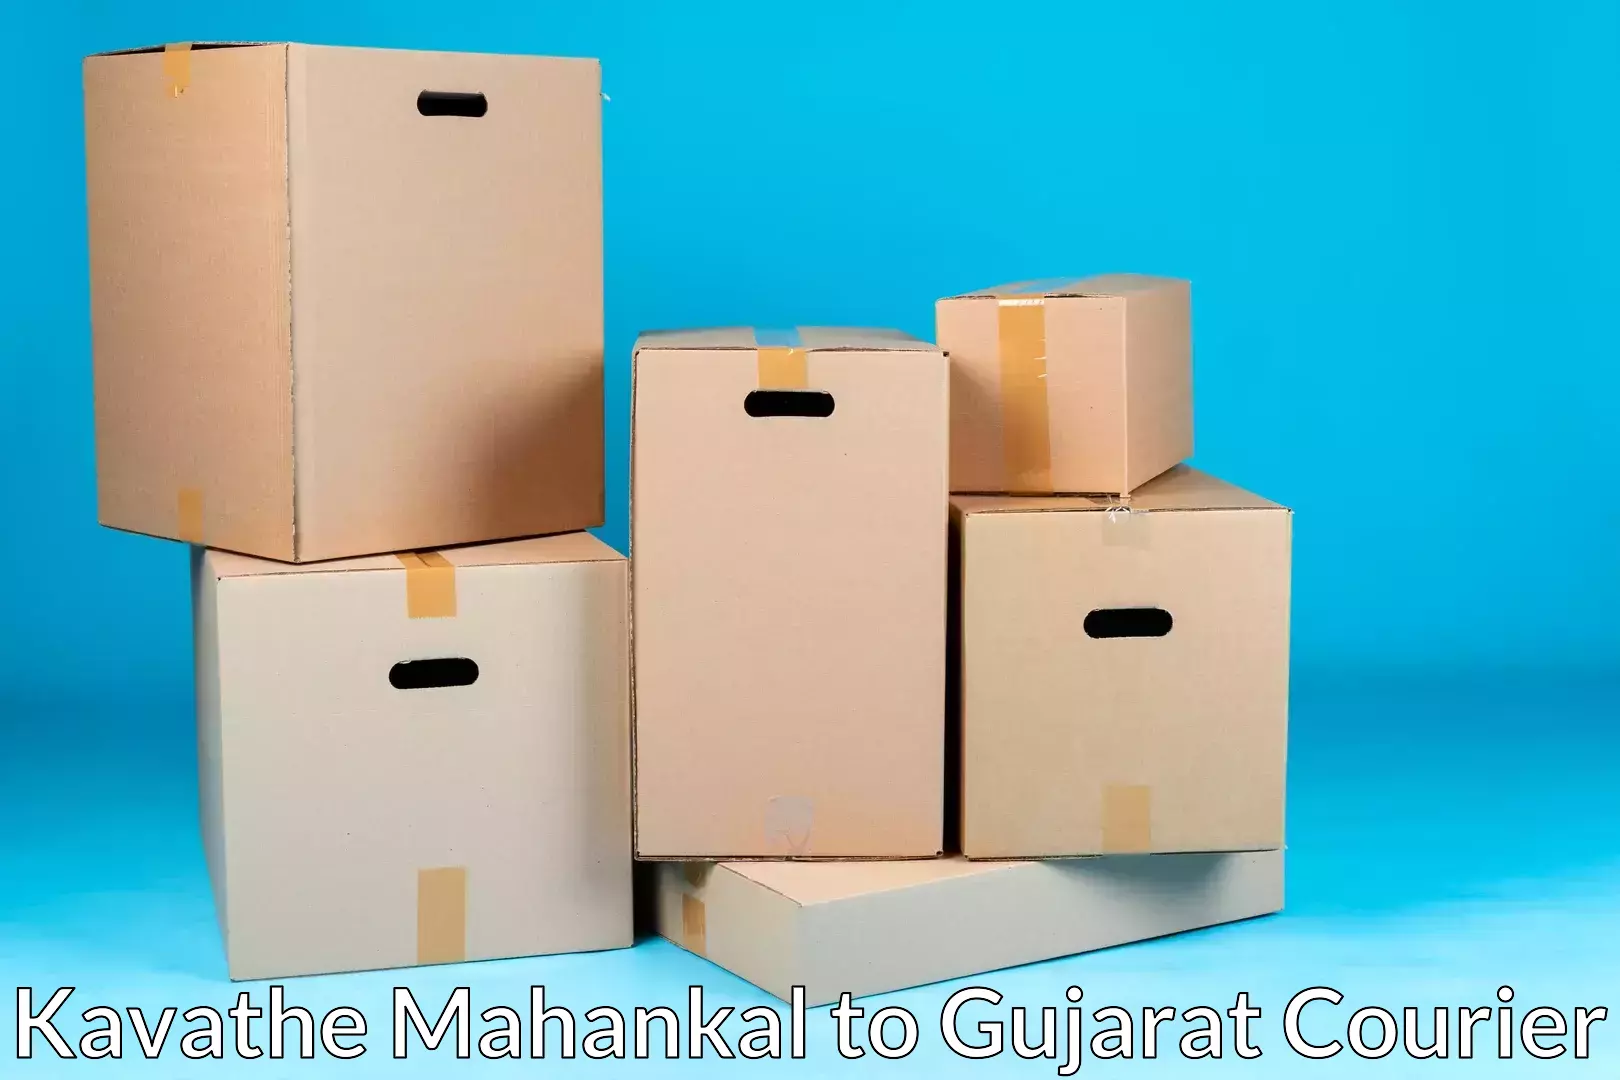 Efficient packing and moving Kavathe Mahankal to Gandhidham